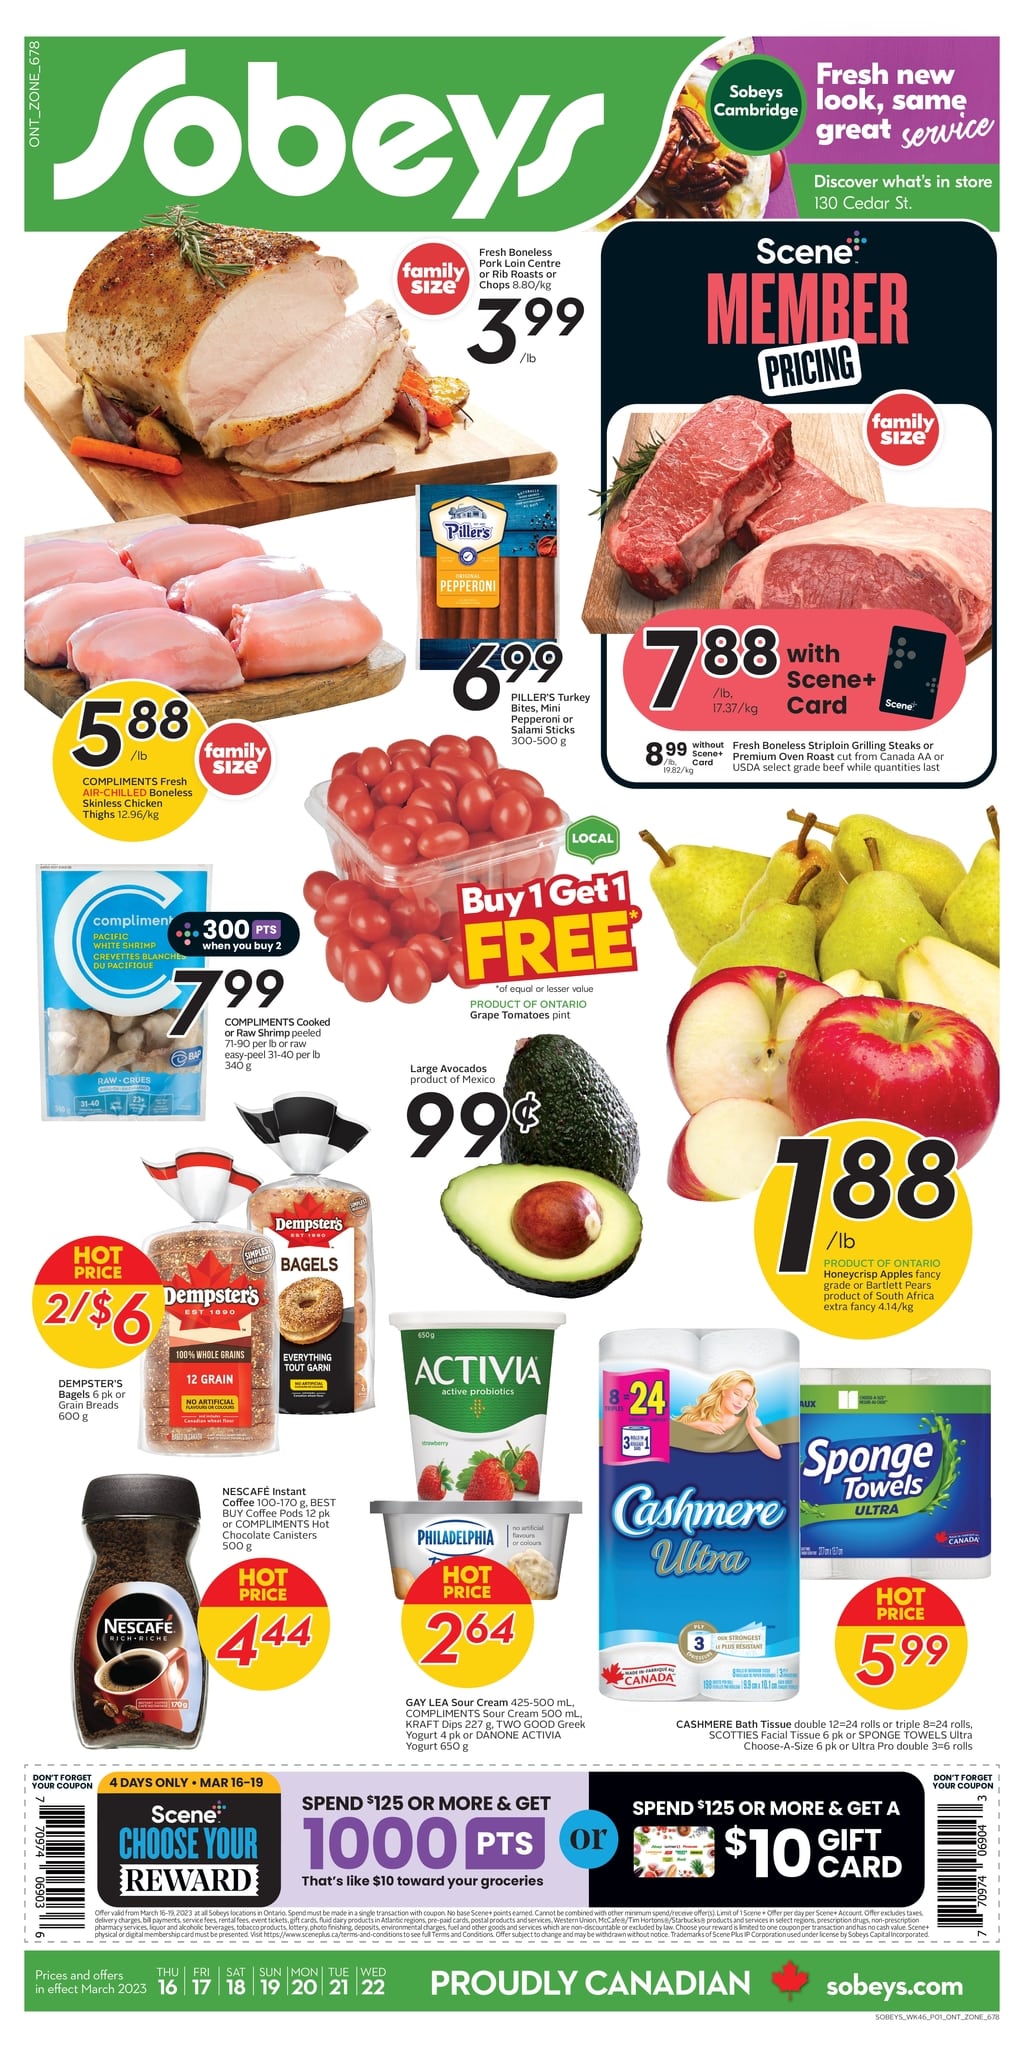 Sobeys - Weekly Flyer Specials - Page 1